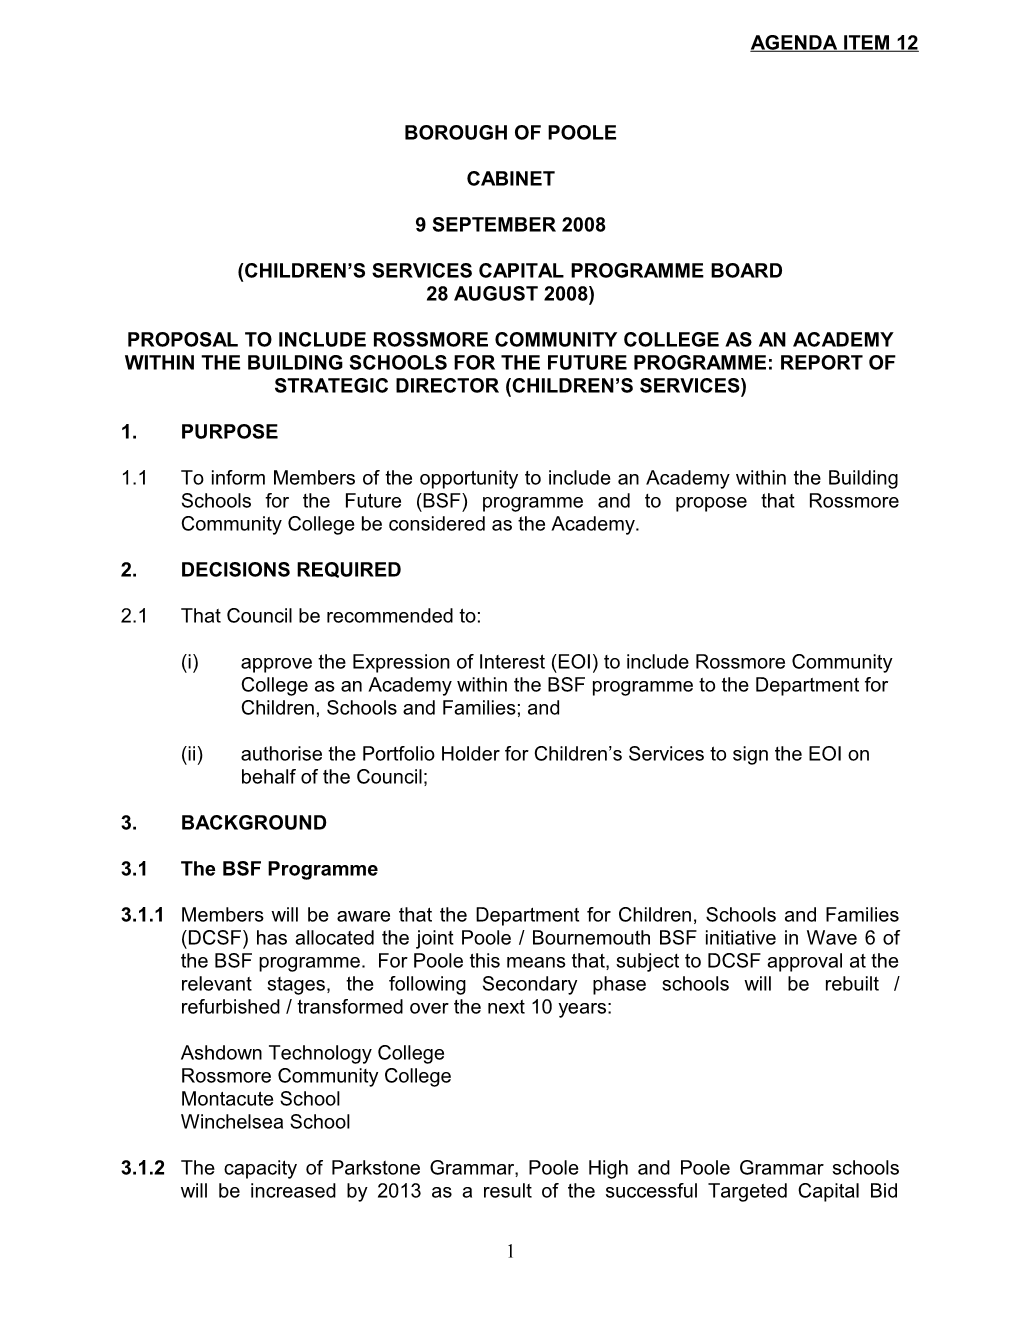 Proposal to Include Rossmore Community College As an Academy Within the Building Schools